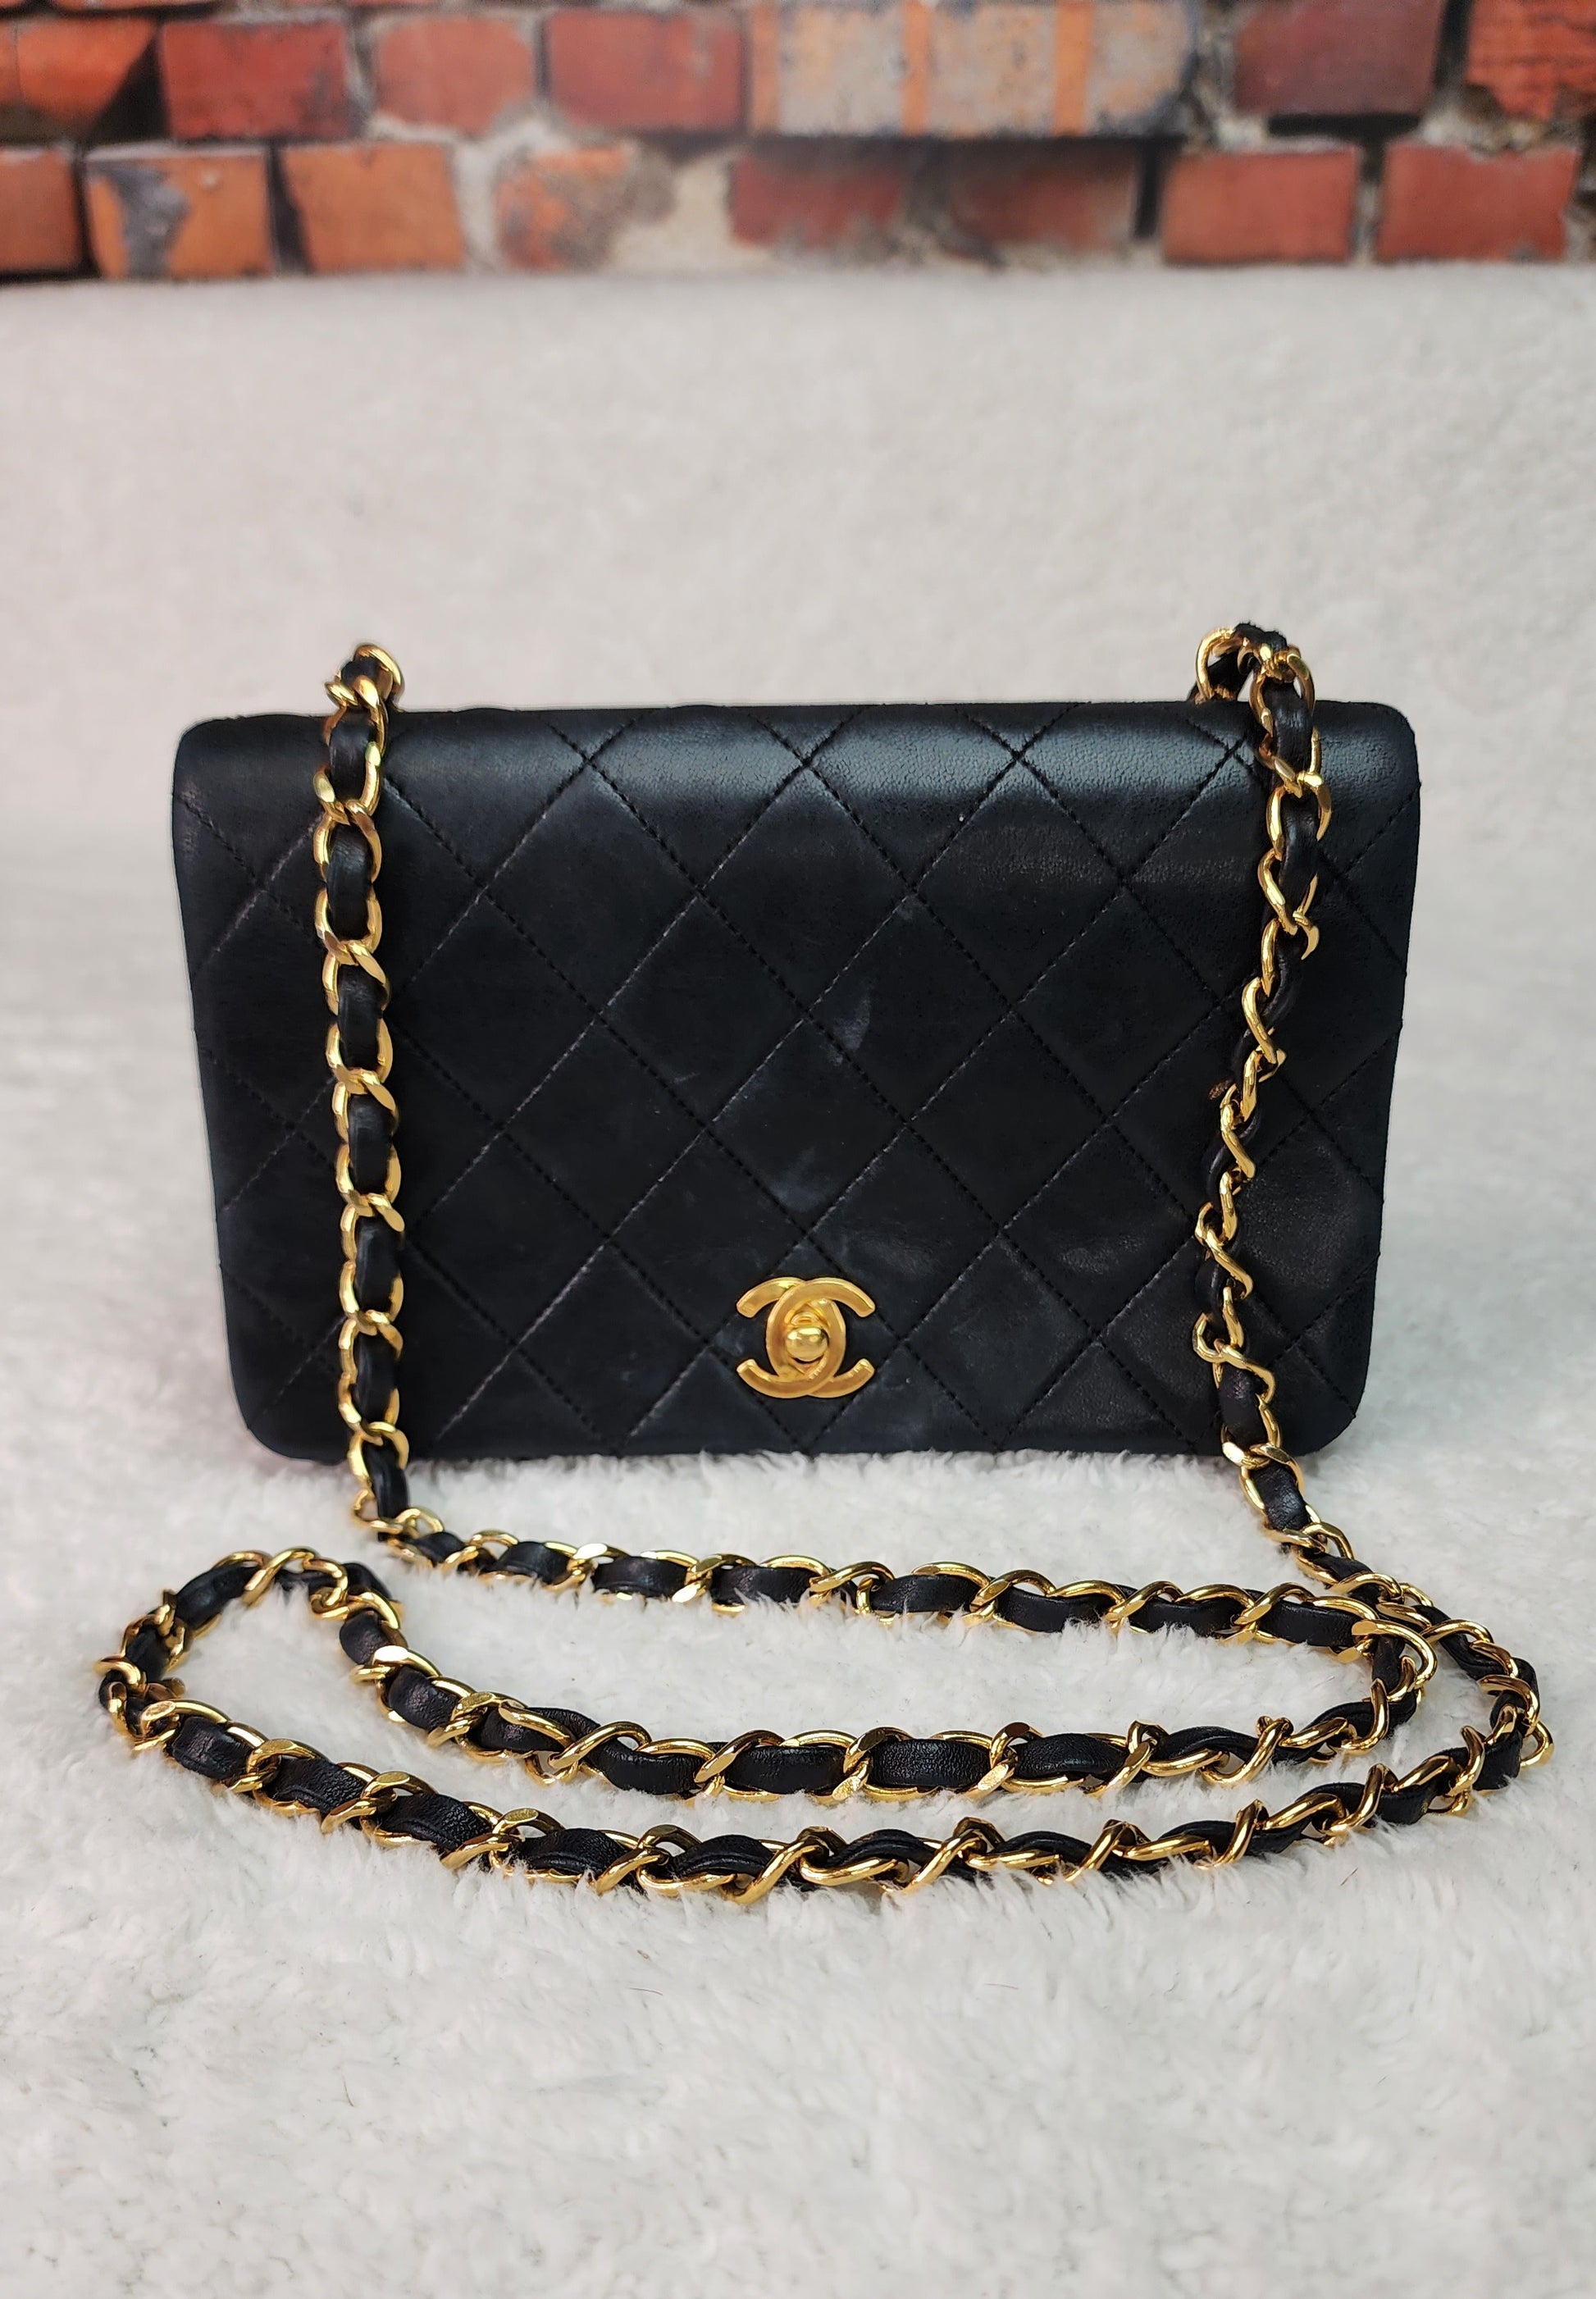 A Closer Look: Chanel Large Quilted Pouch Bag